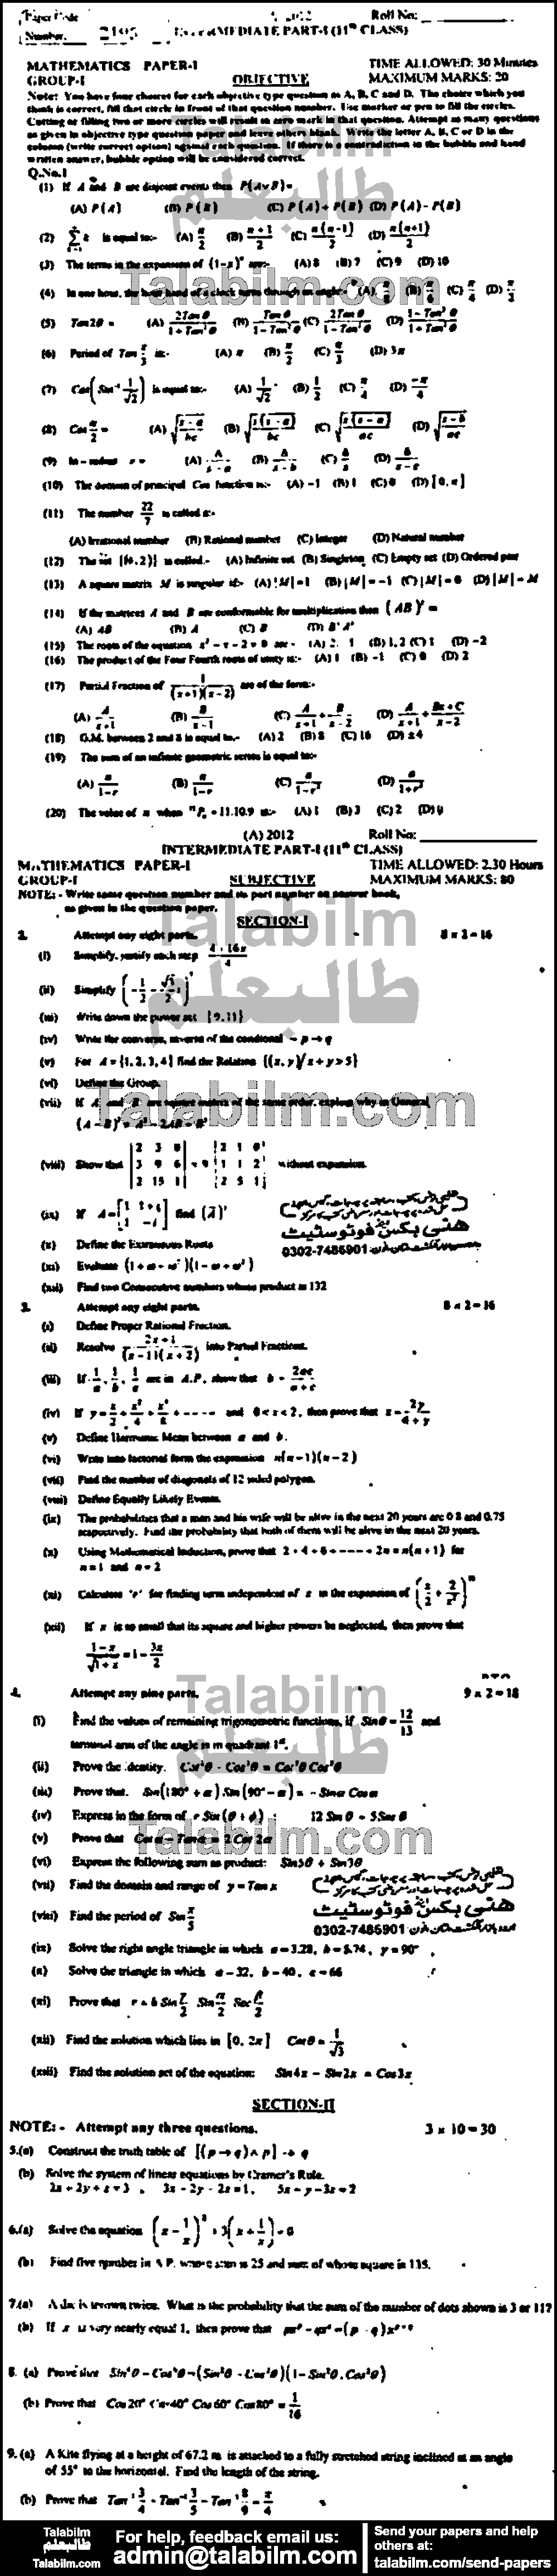 Math 0 past paper for Group-I 2012